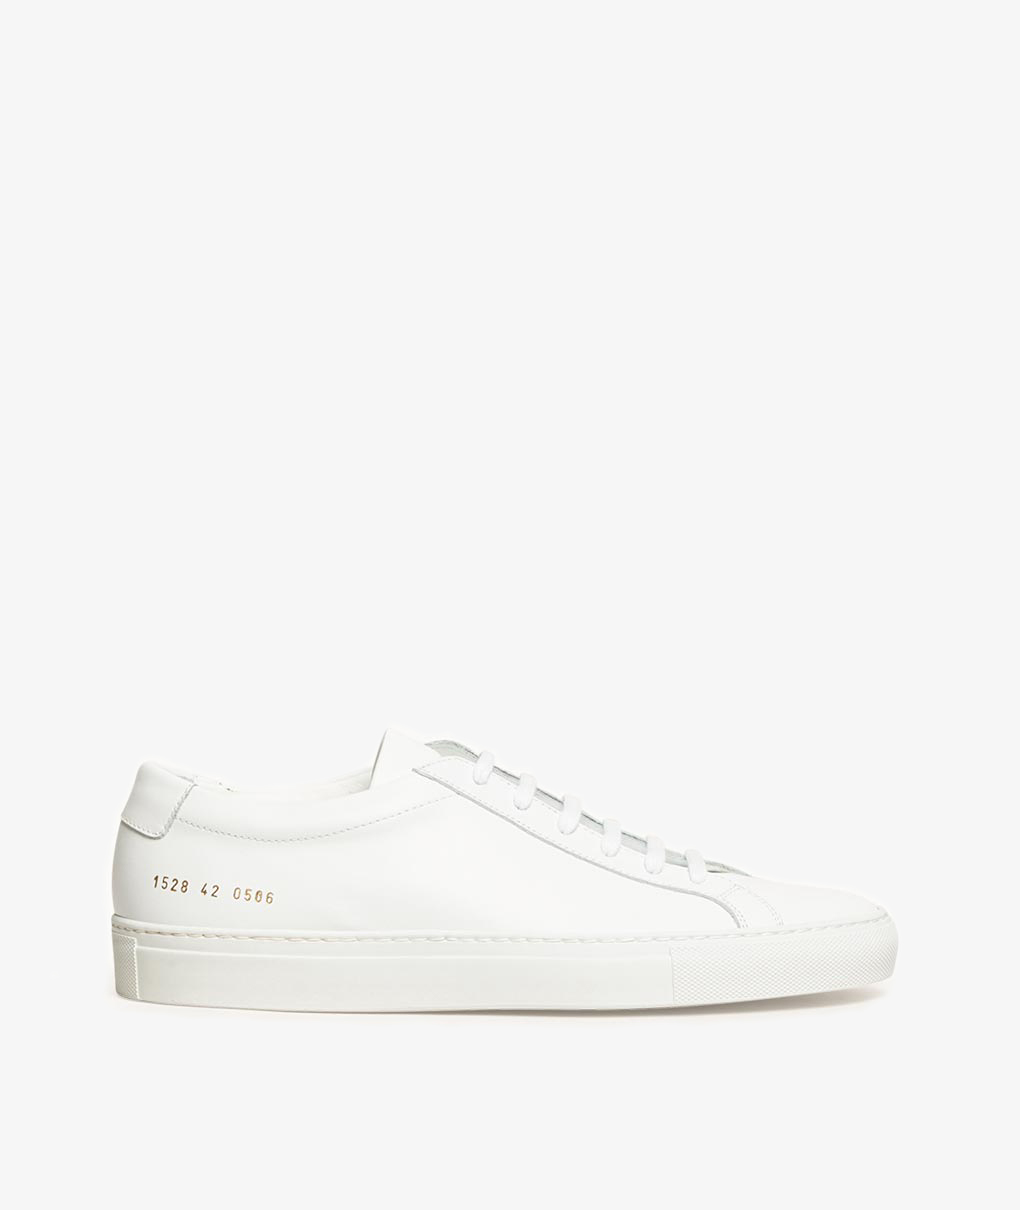 common projects achilles low white 42